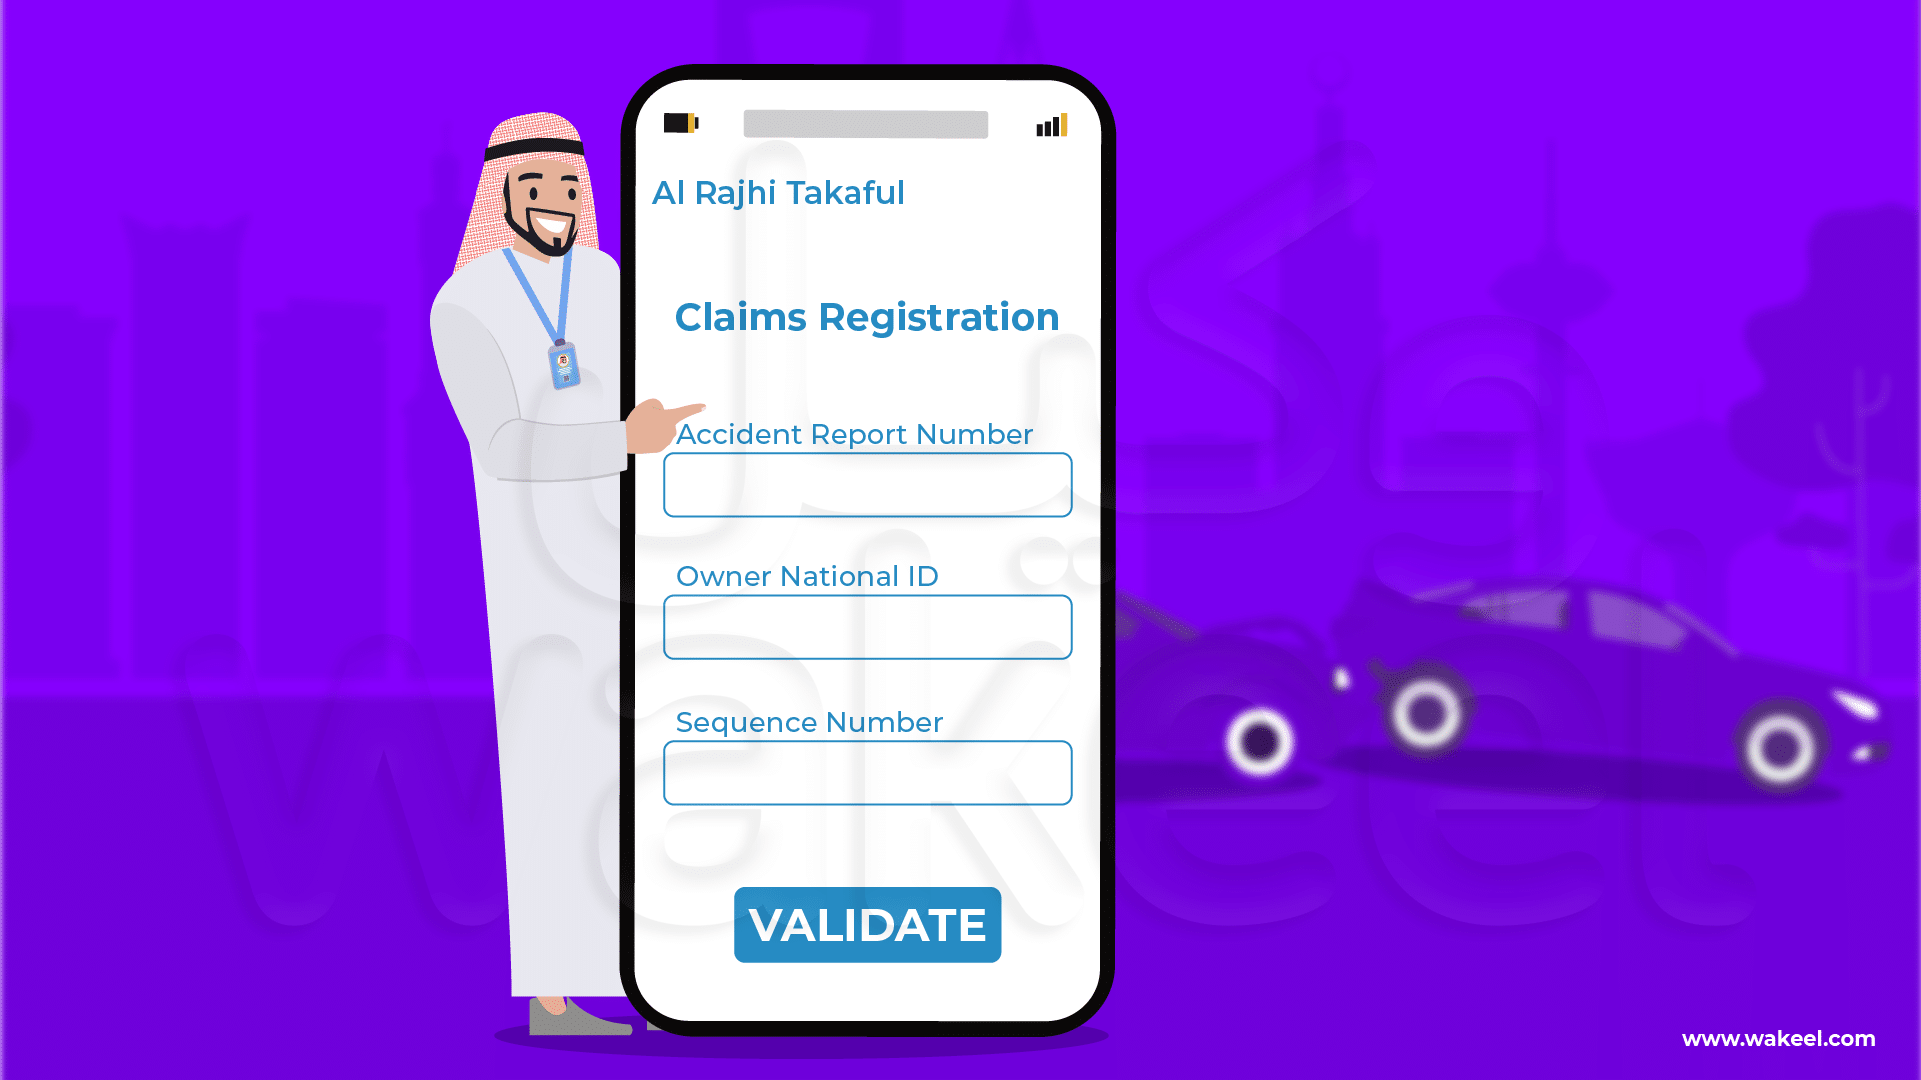 A man with a friendly smile stands next an iPhone. The screen displays the Takaful Al Rajhi online claim filing process. This image depicts an accident between two cars in the background